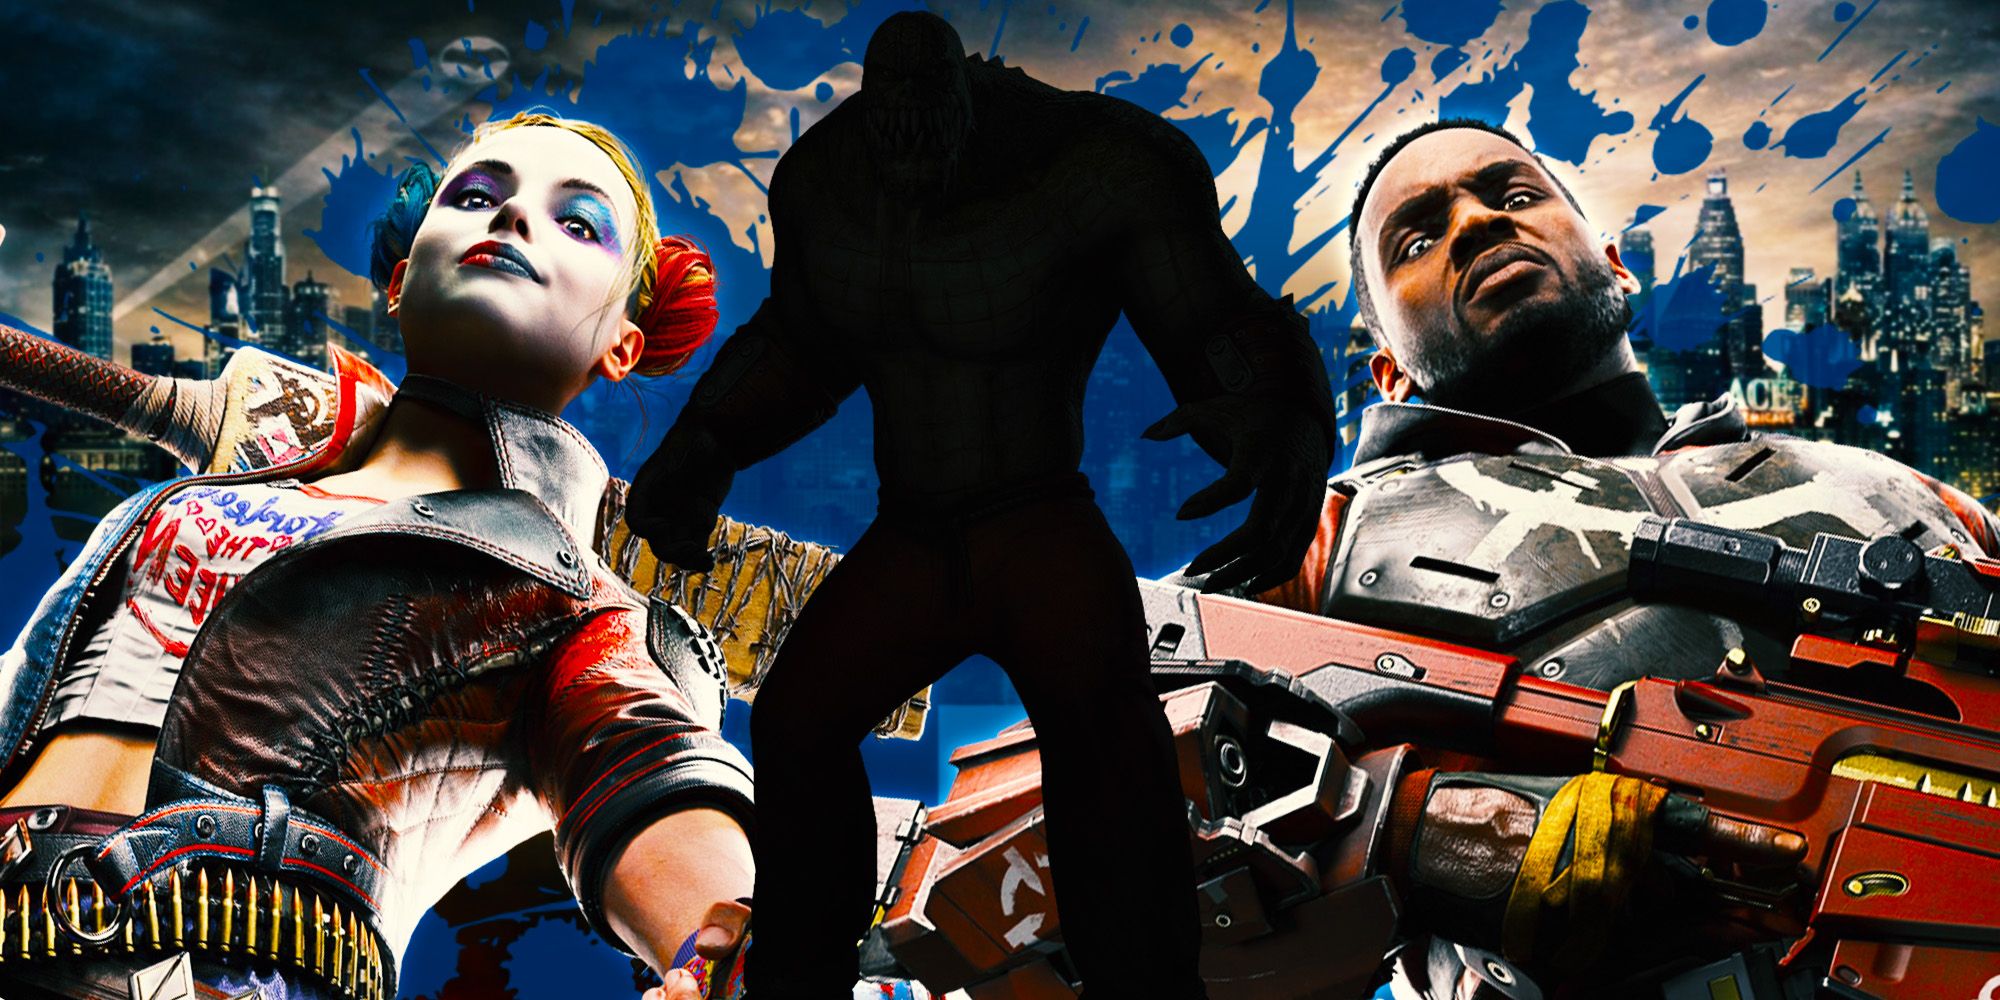 Suicide Squad: Kill the Justice League Is Getting a Closed Alpha Test Very  Soon